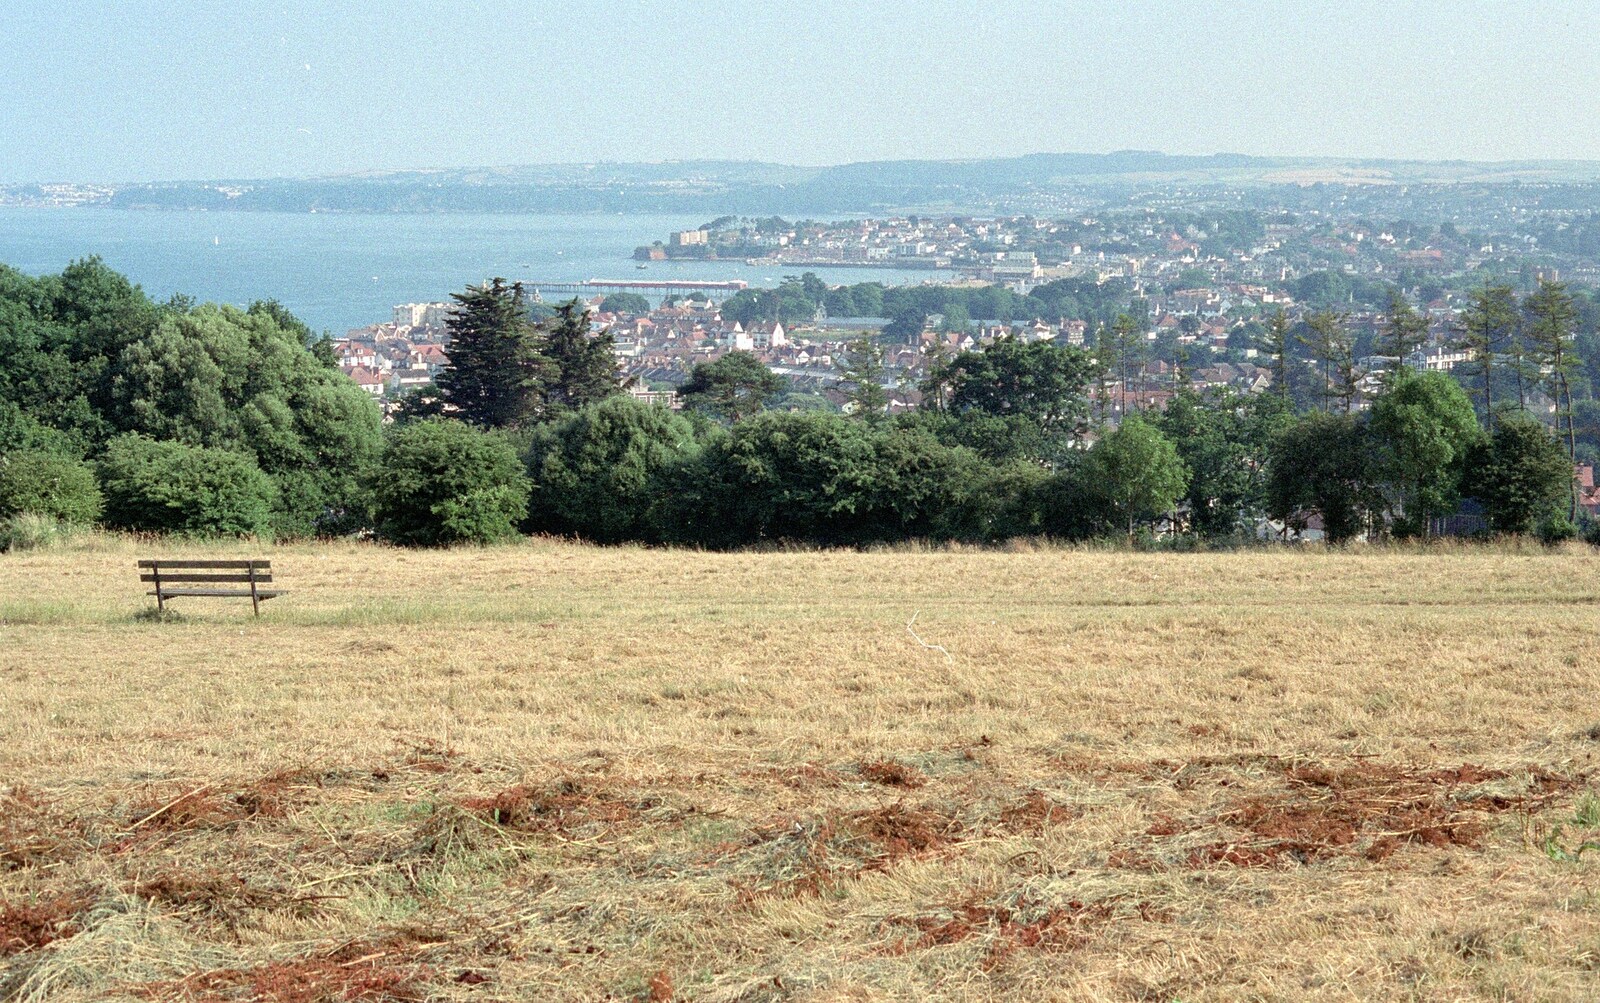 The view over Torquay from Uni: A Trip to the Riviera and Oberon Gets New Shoes, Torquay and Harbertonford, Devon - 3rd July 1989